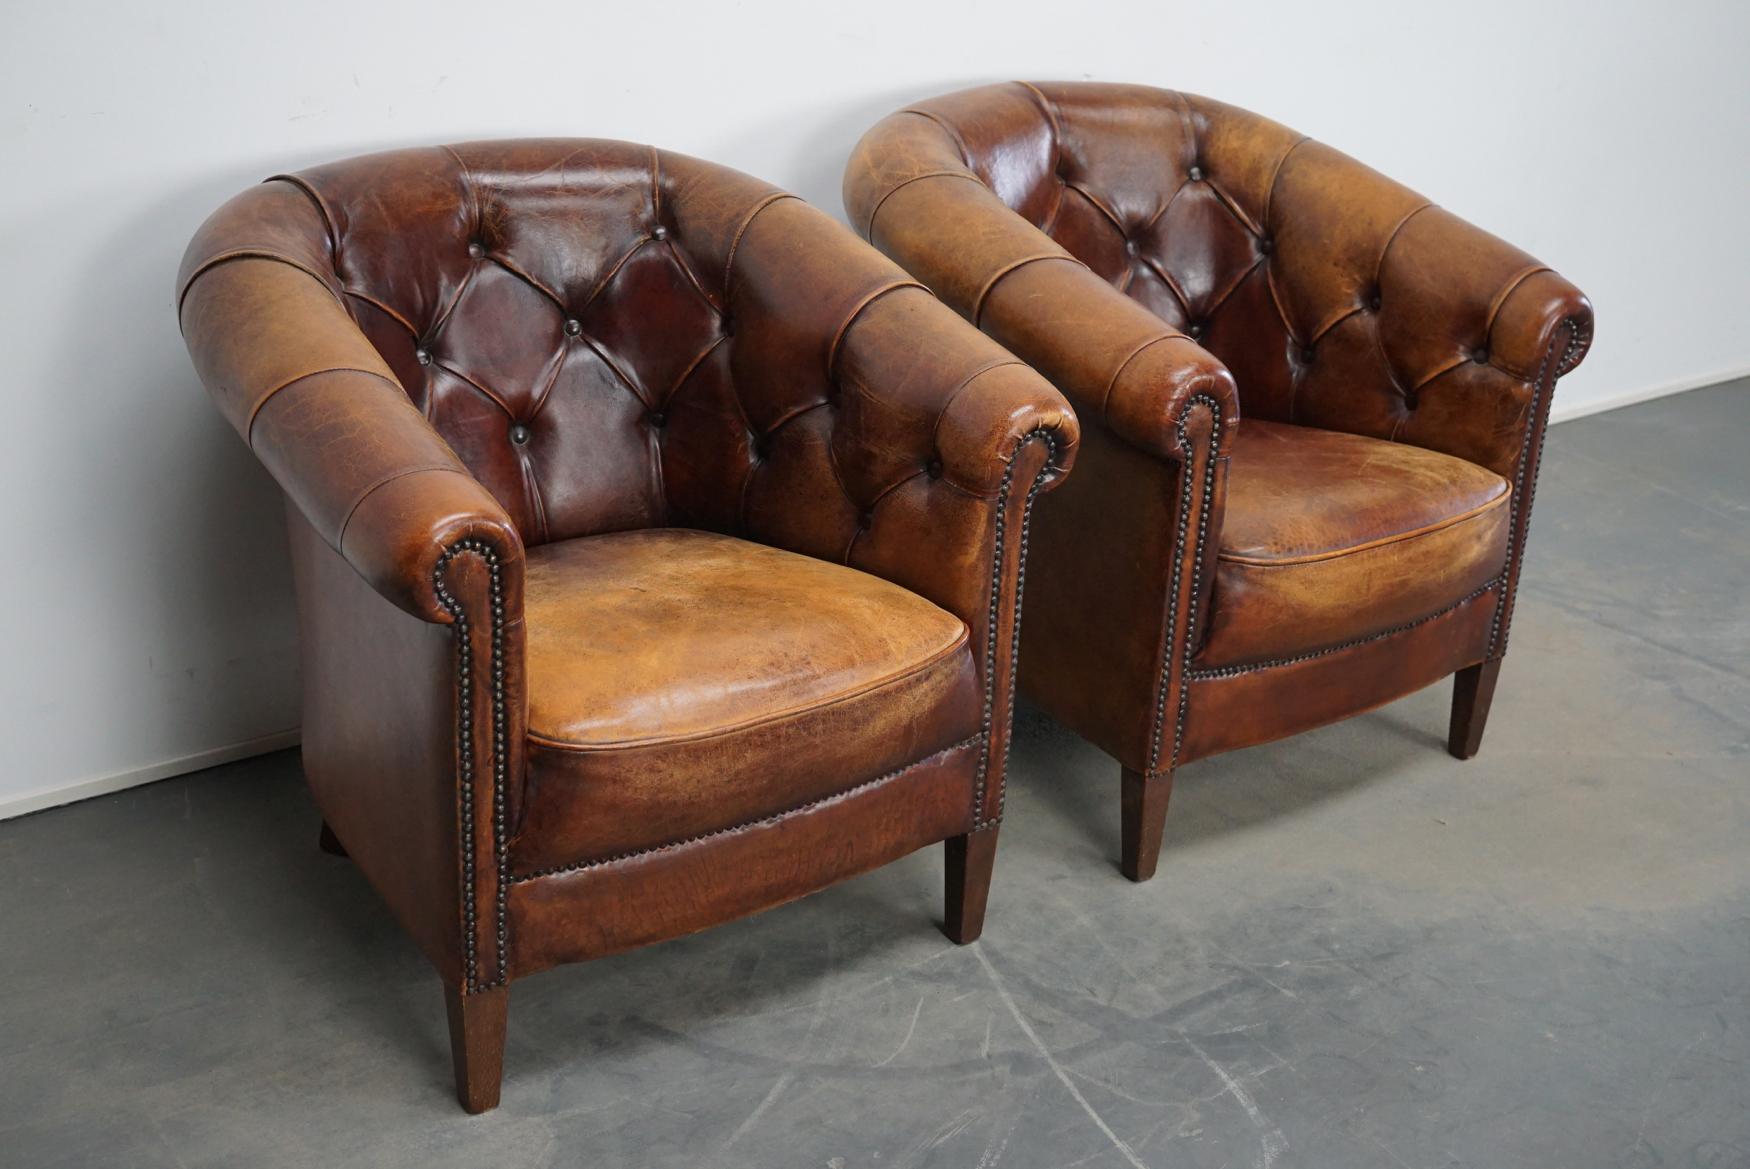 Vintage Dutch Chesterfield Cognac Leather Club Chairs, Set of 2 9